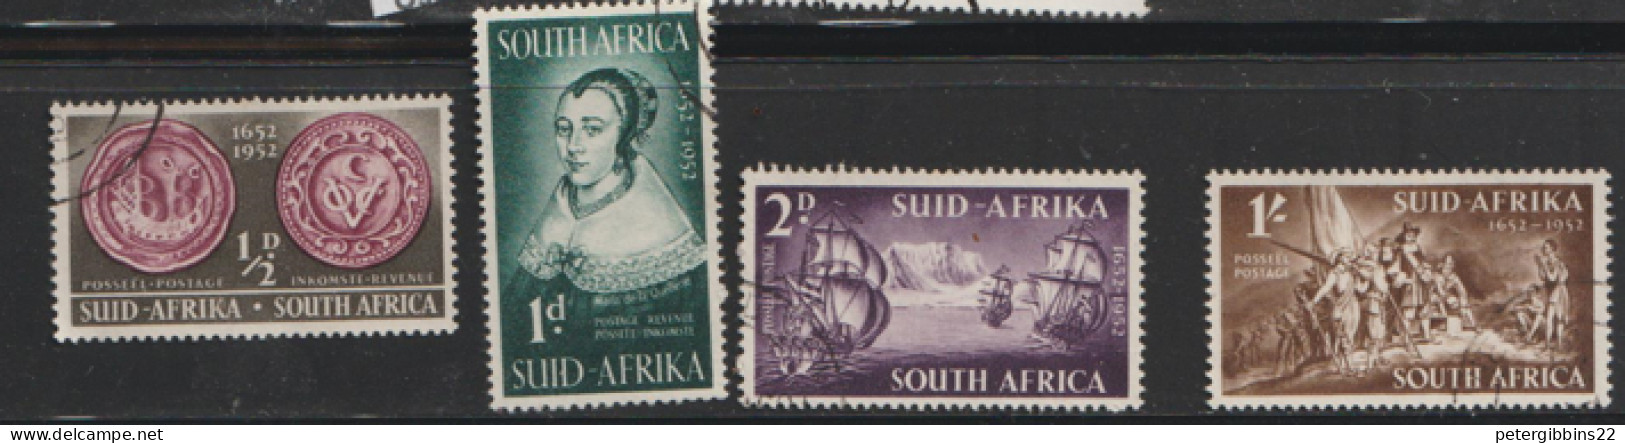 South Africa  1951  SG 136-40  Van Riebeeck  Fine Used - Used Stamps